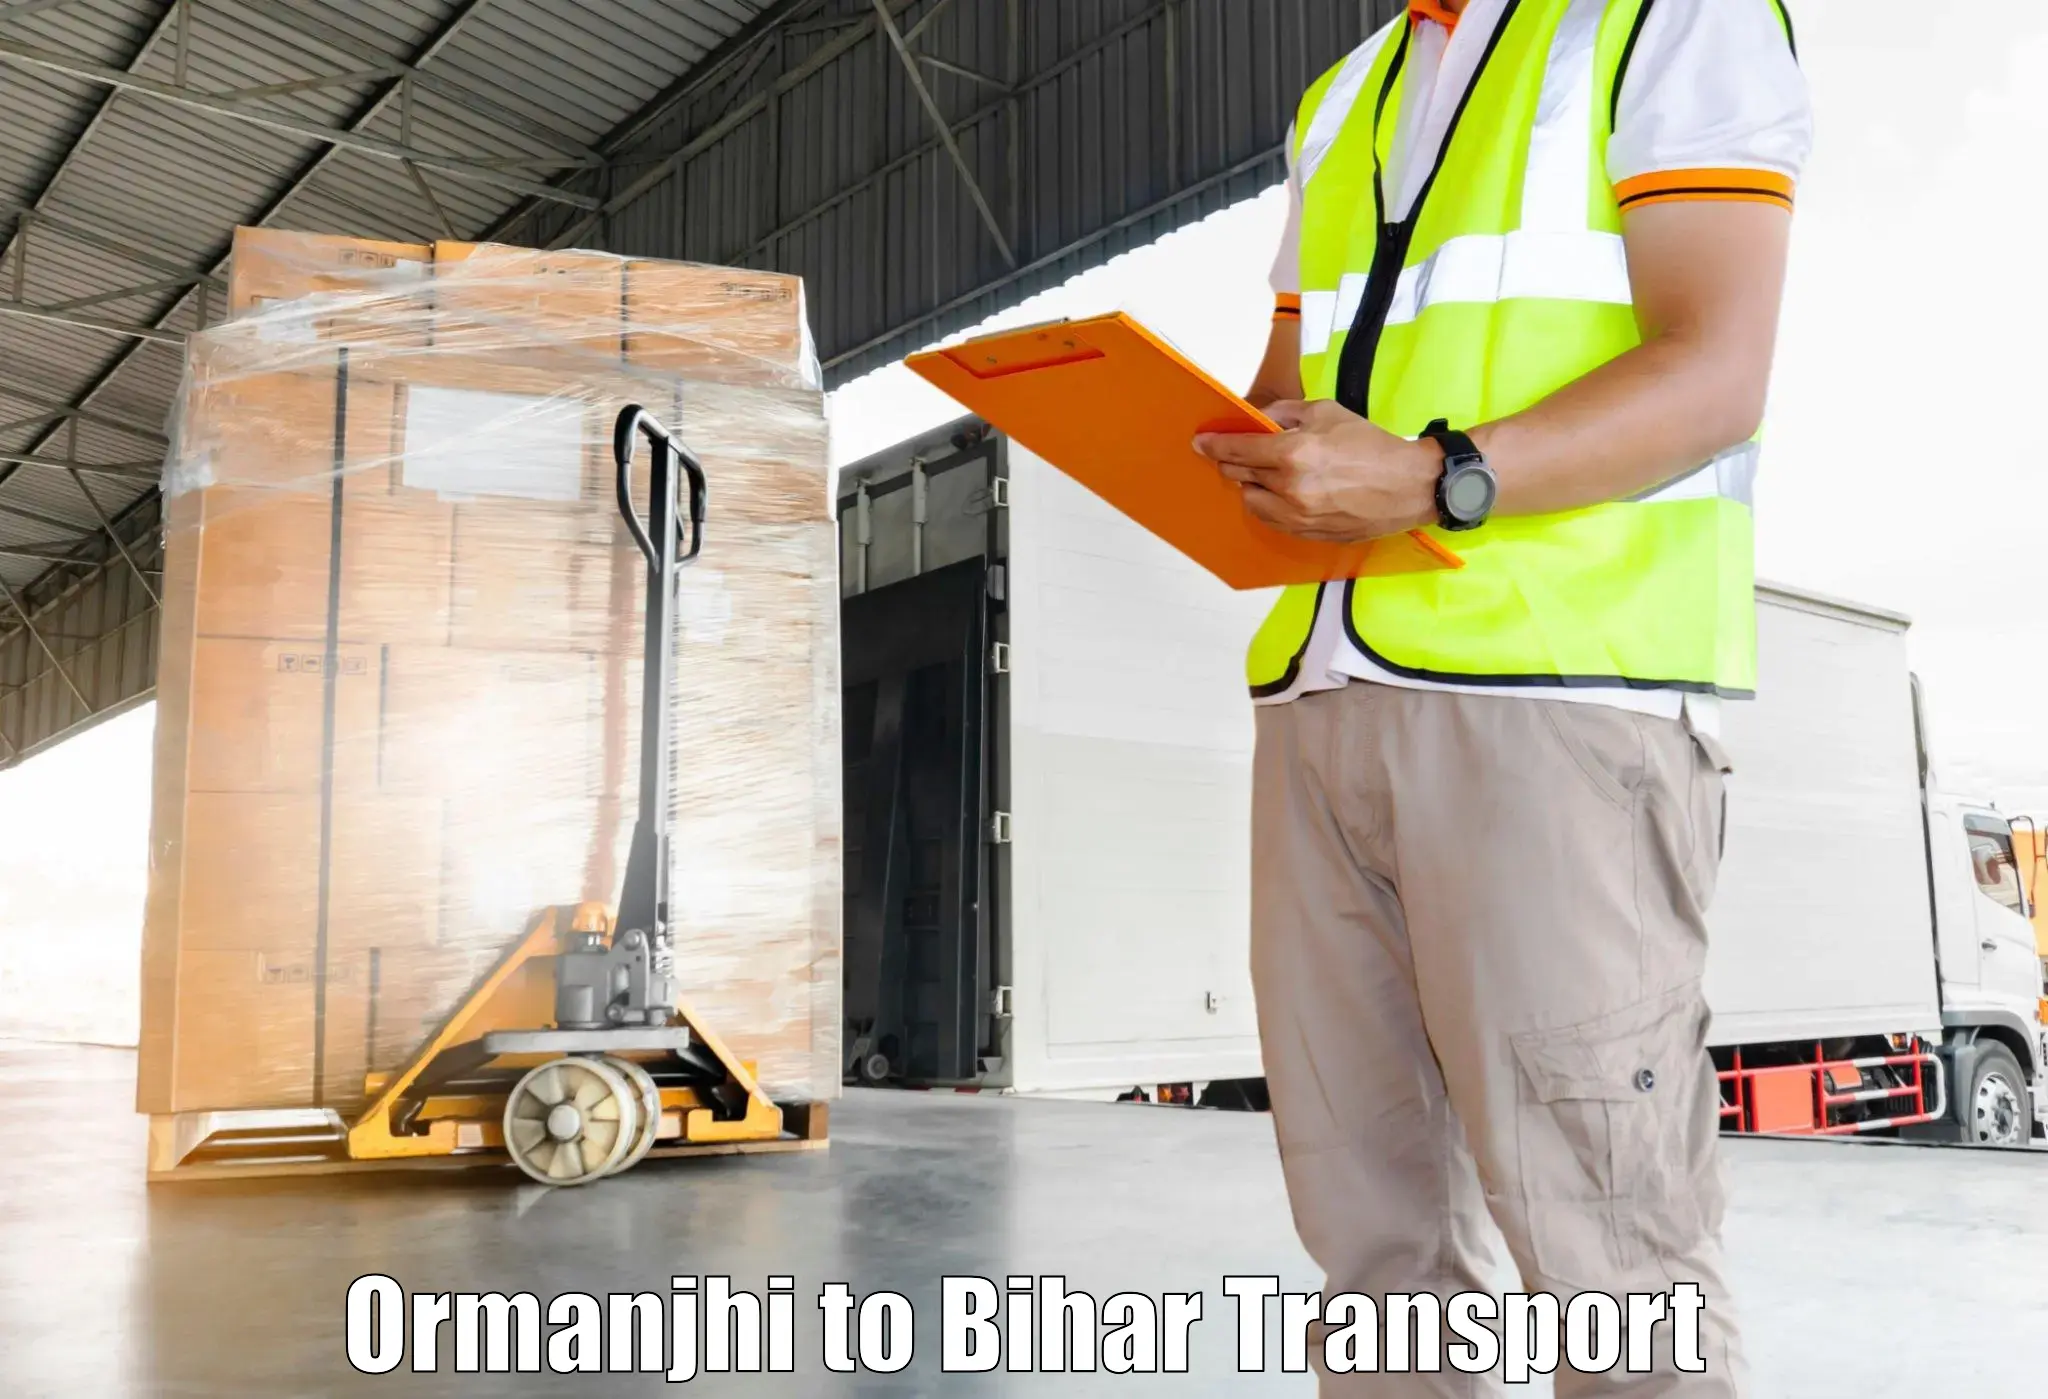 Express transport services in Ormanjhi to Banmankhi Bazar